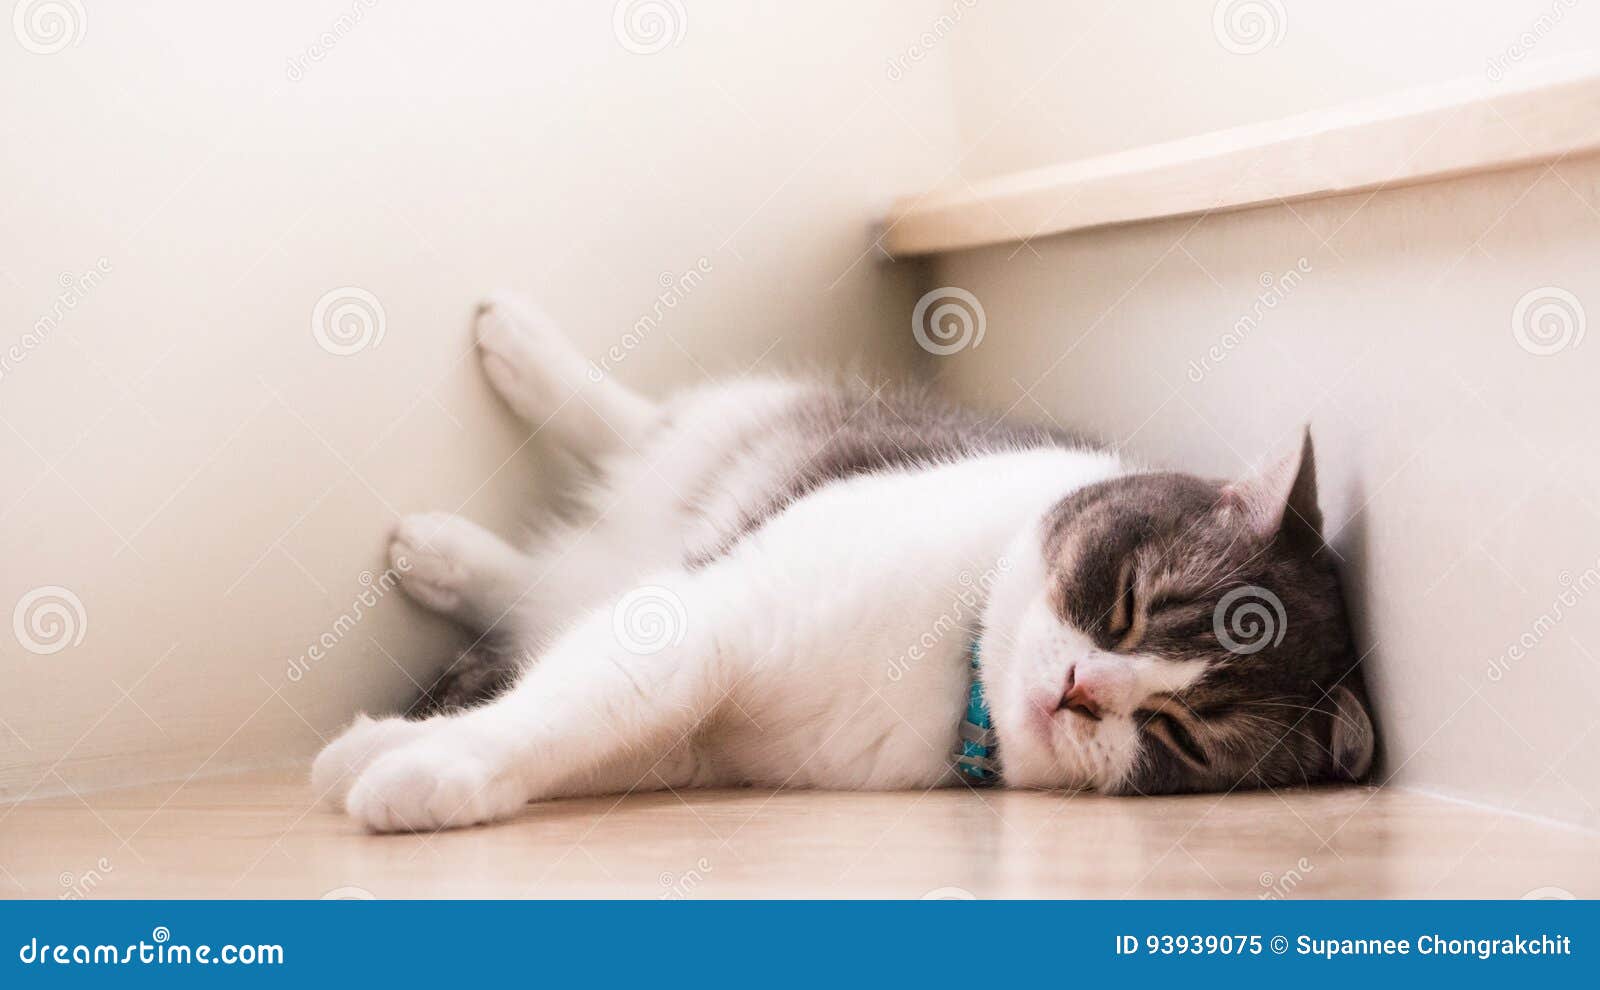 cute cat sleeping on wooden stairs, scottish fold ears unfold gray and white color.